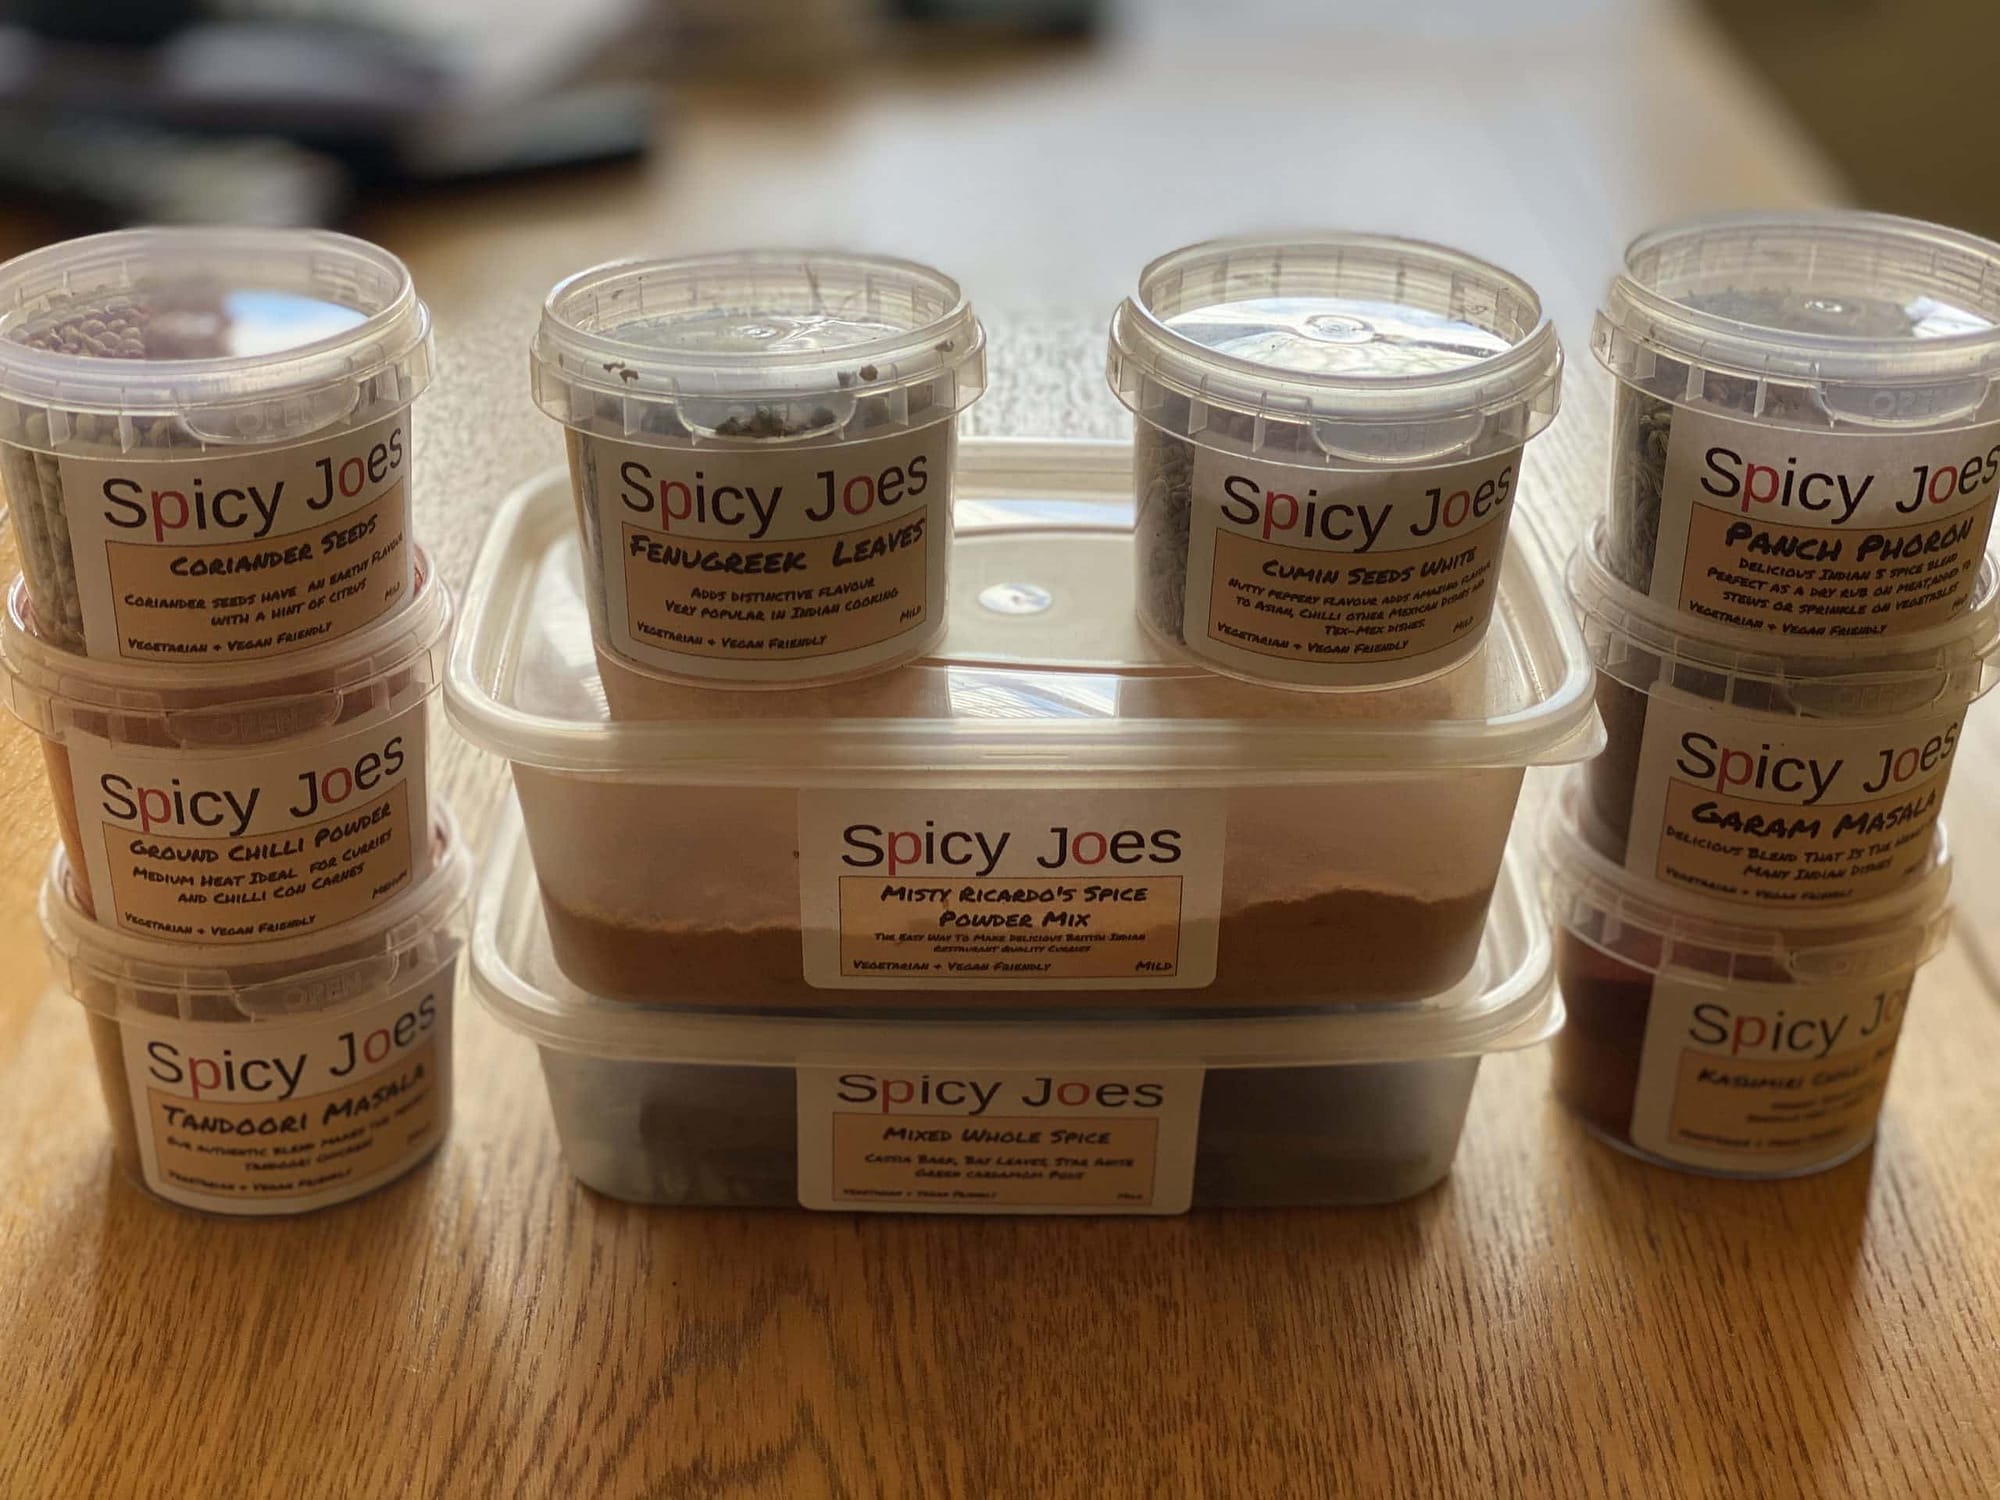 Misty Ricardo's Essential Spice Kit from Spicy Joes